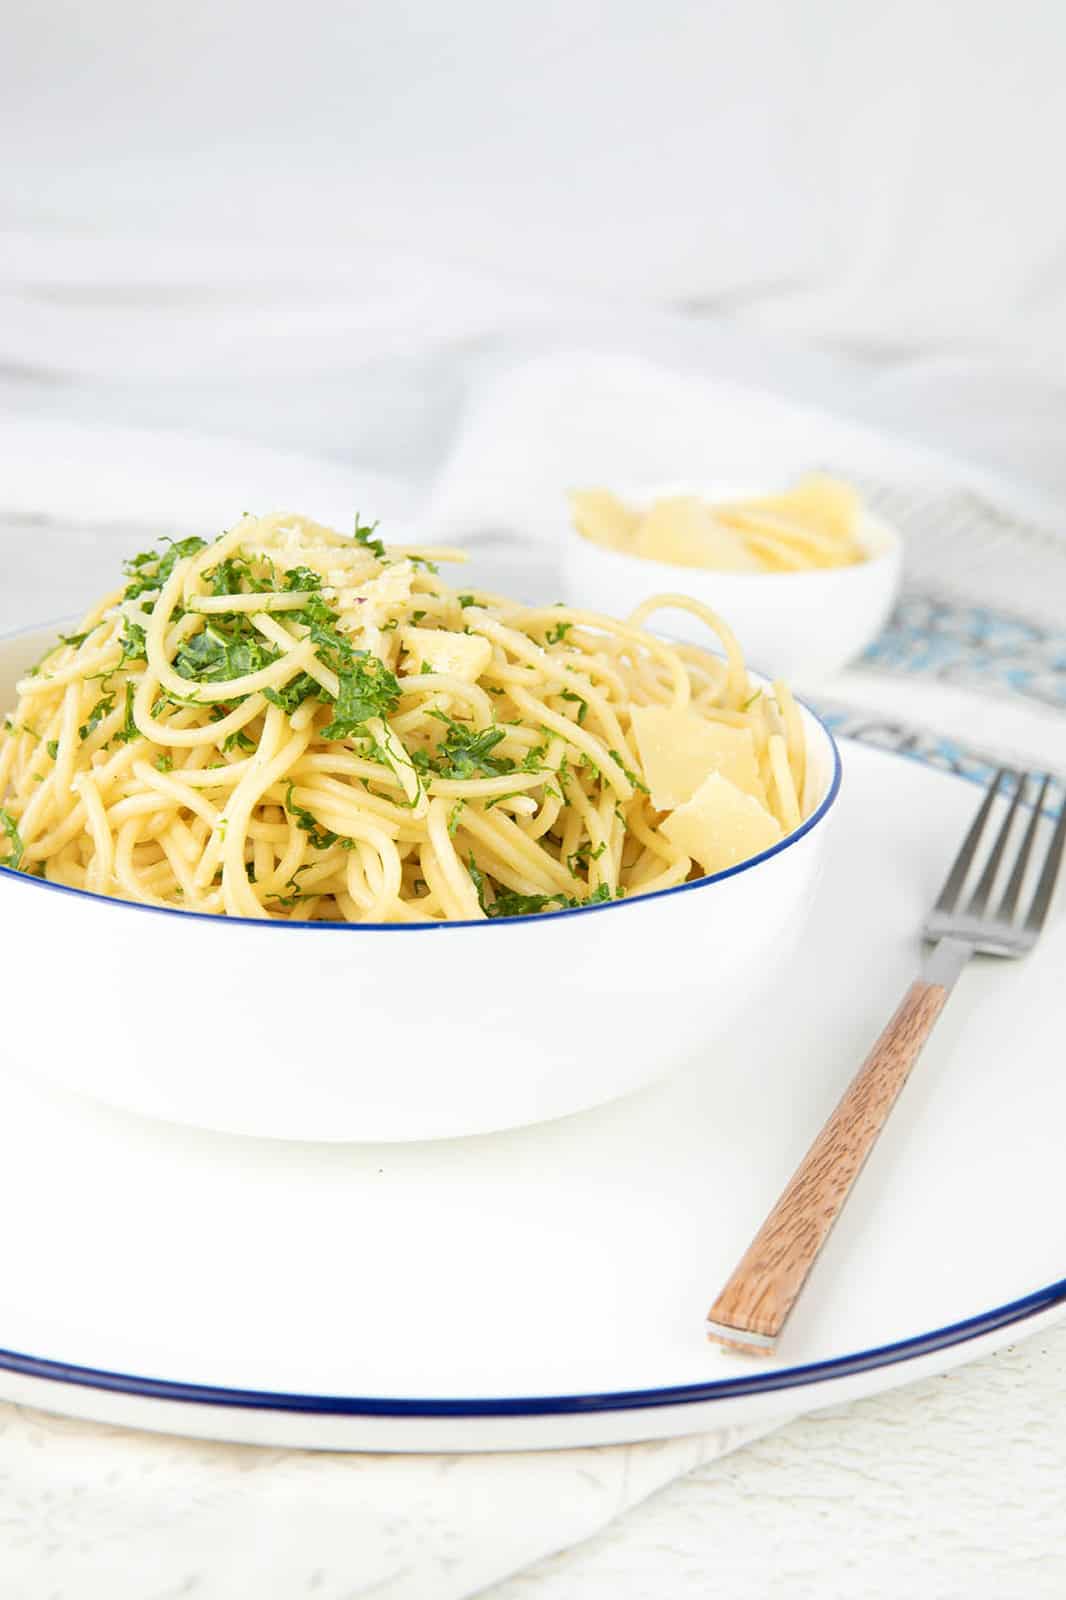 Thermomix Pasta in a white bowl with a fork ready to eat with parsley and cheese